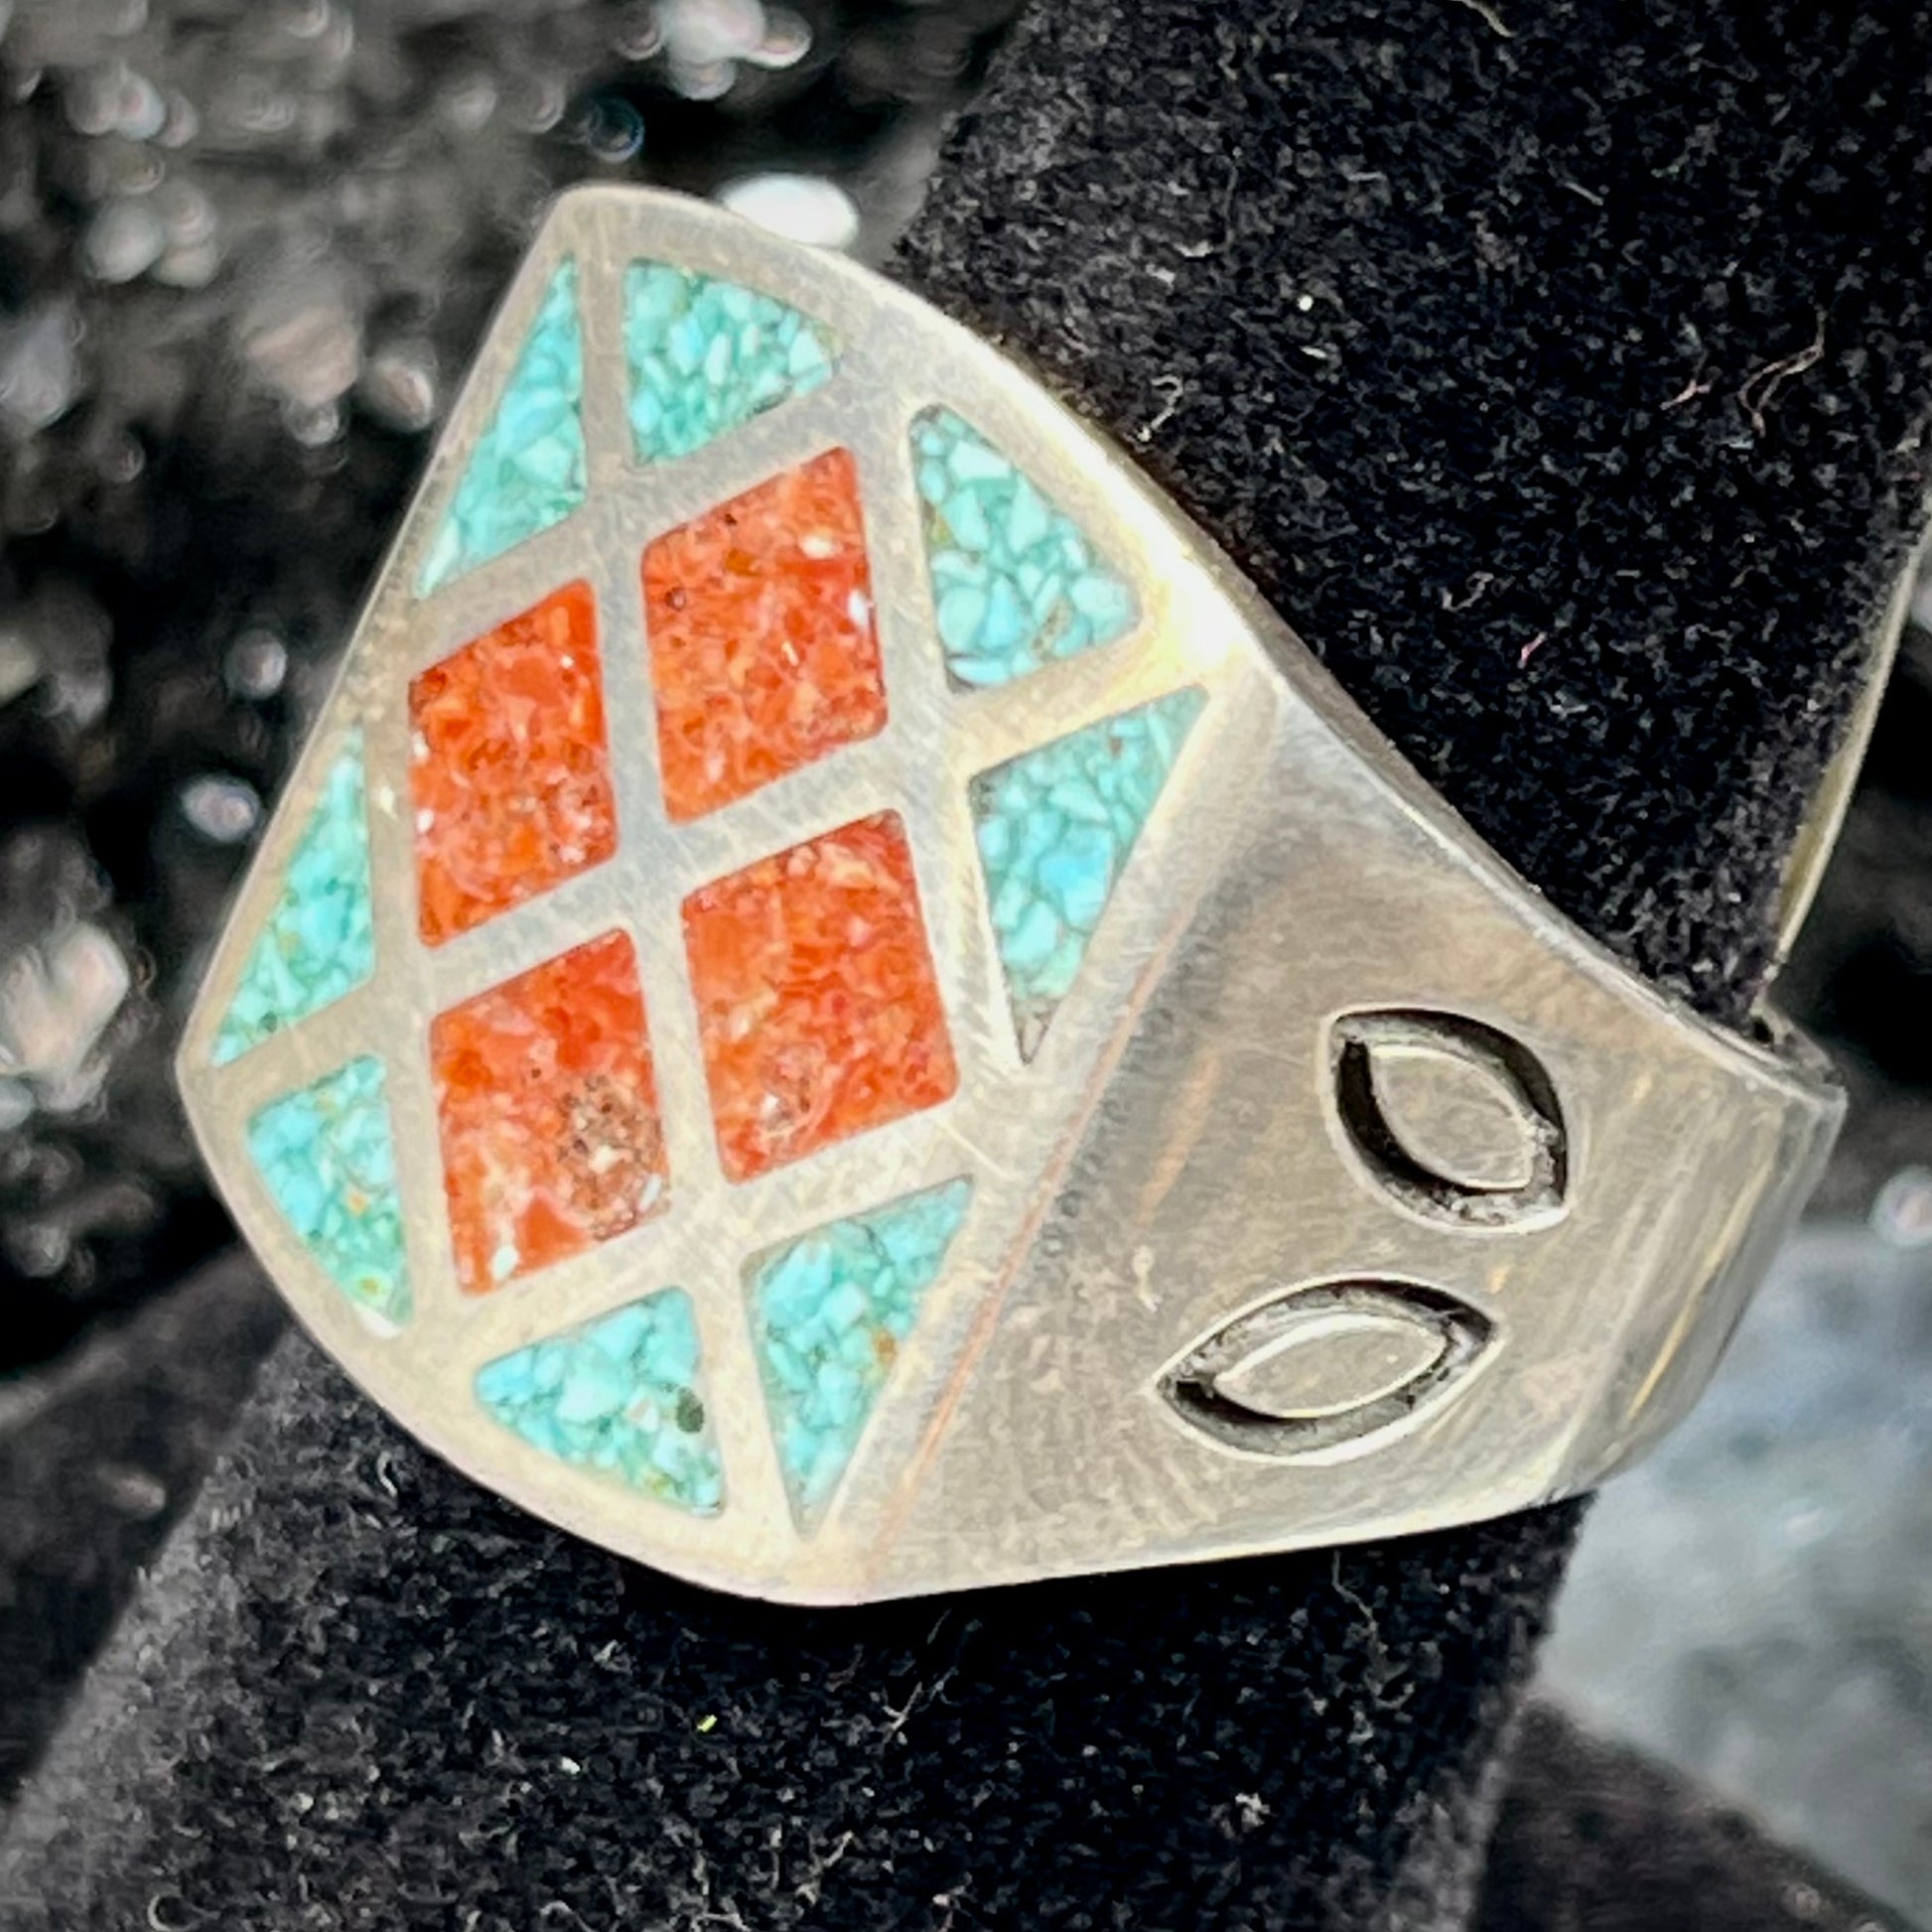 A men's sterling silver inlay ring set with sections of crushed blue turquoise and crushed red coral.